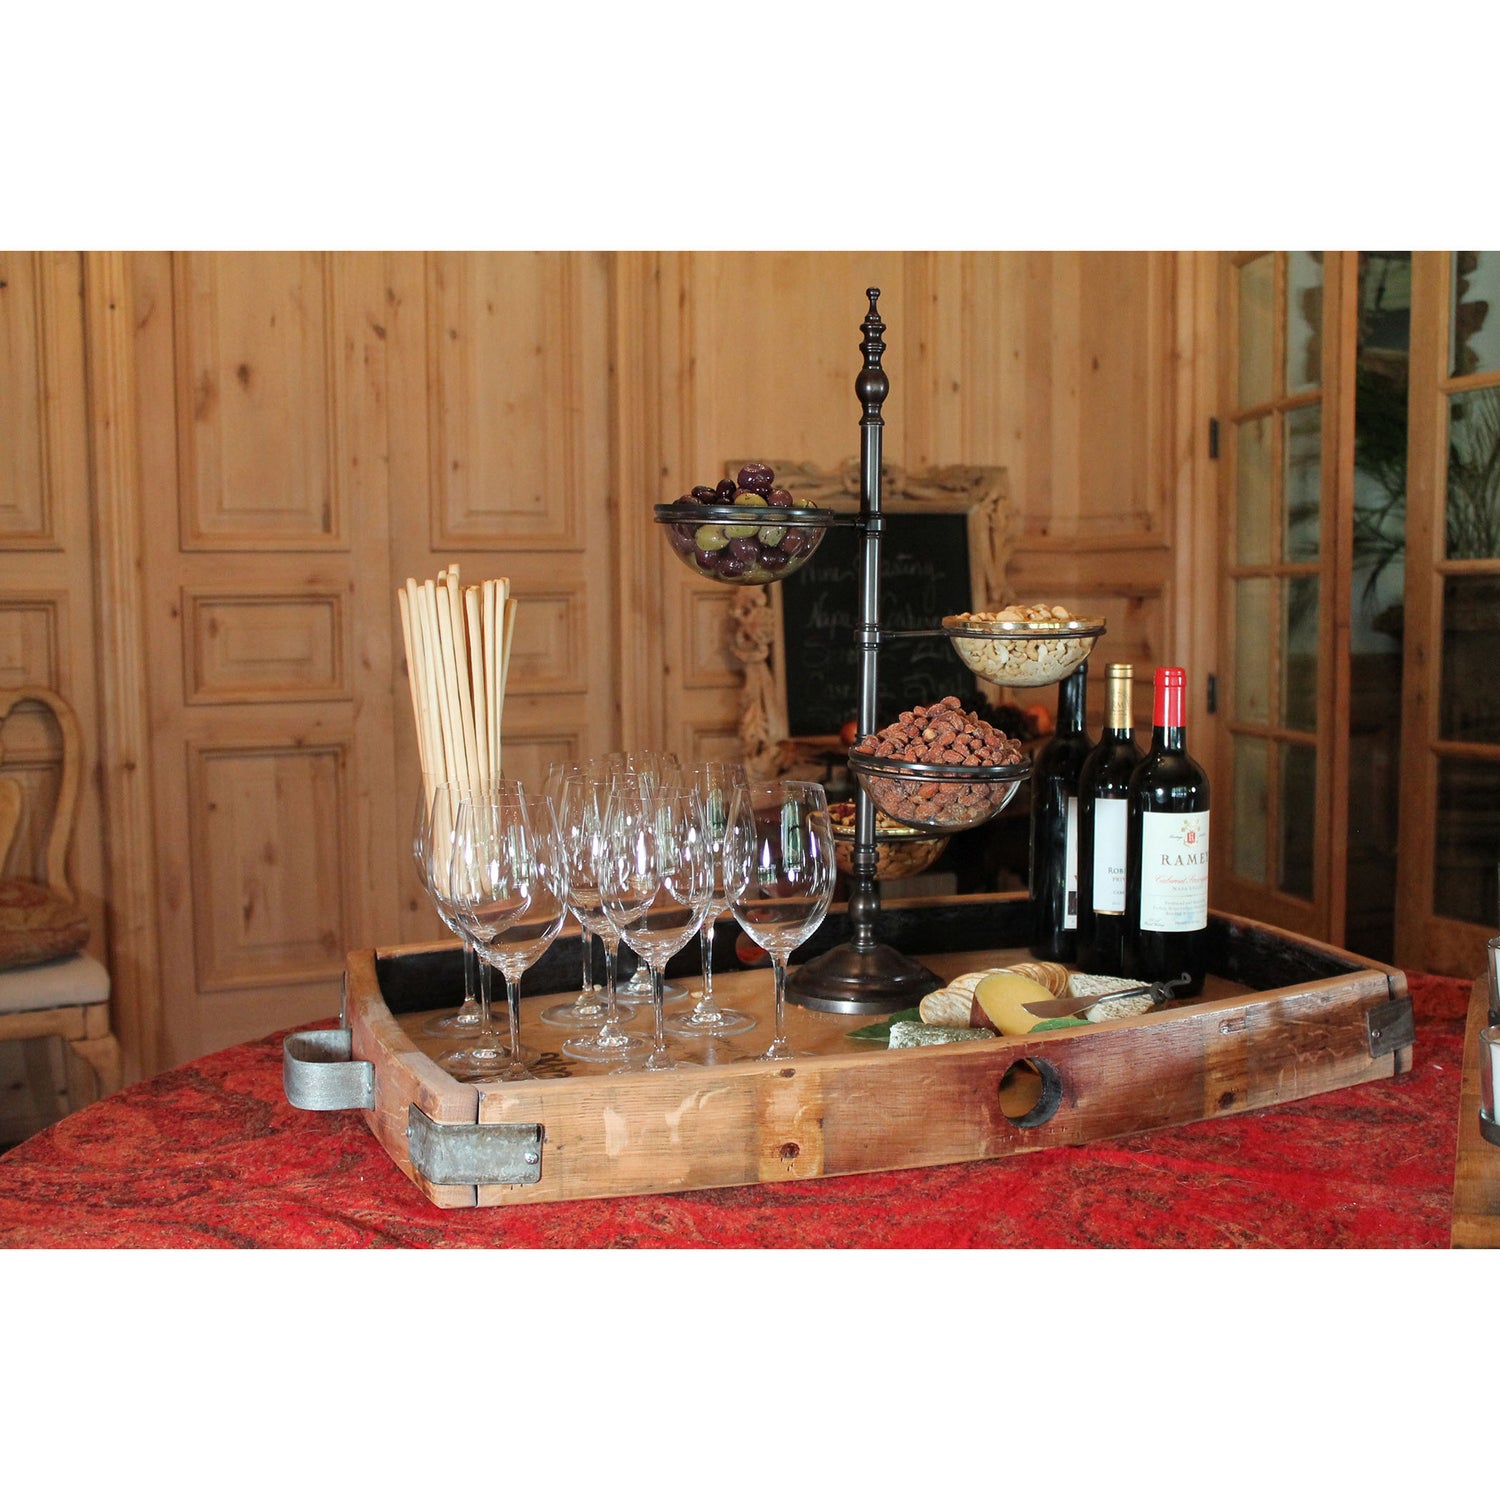 ELK Home - TRAY012 - Serving Tray - Wine - Natural